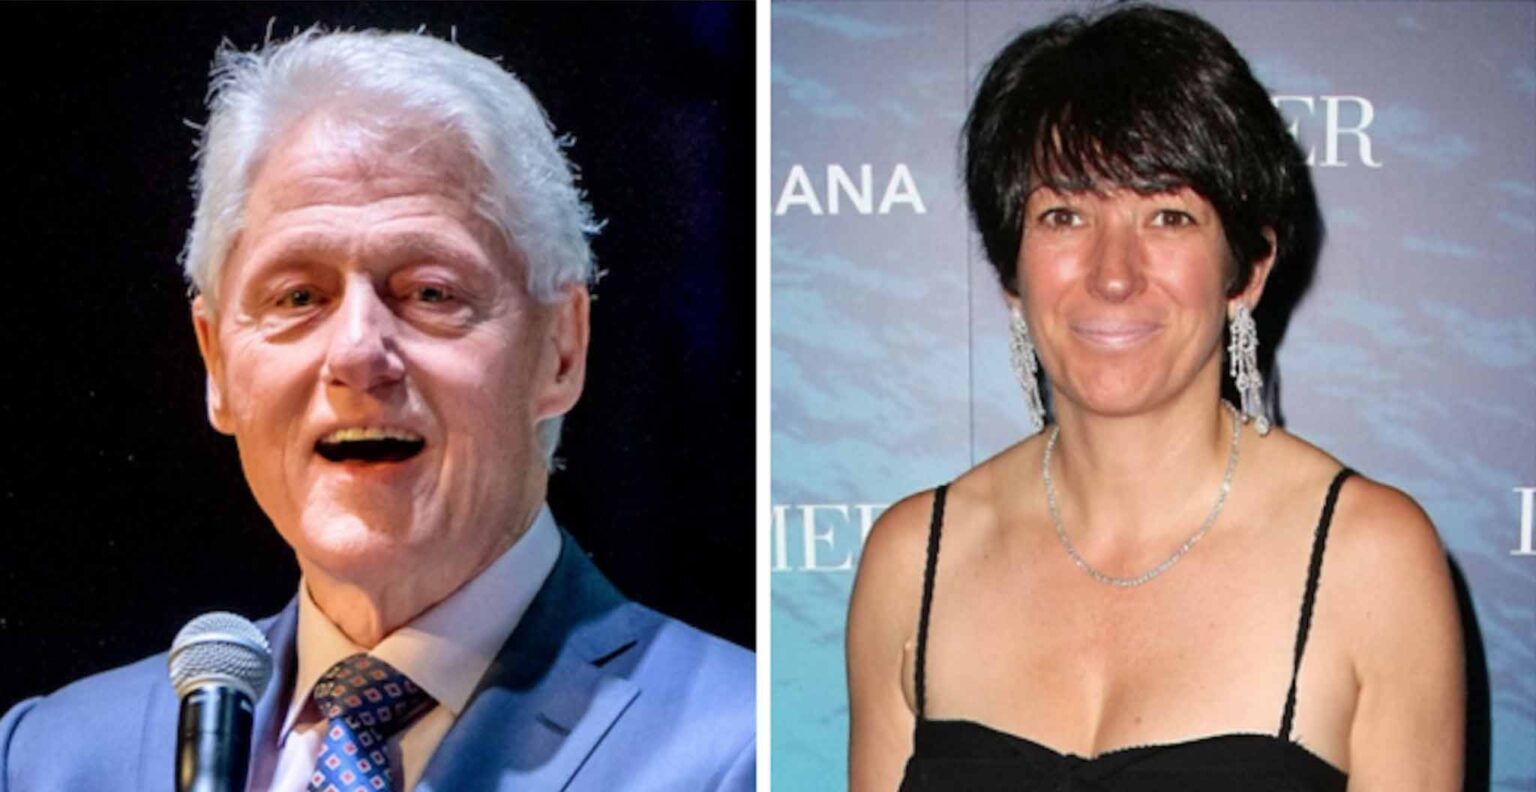 Bill Clinton has been tied to Jeffrey Epstein in a number of ways, so how close was he to Ghislaine Maxwell?